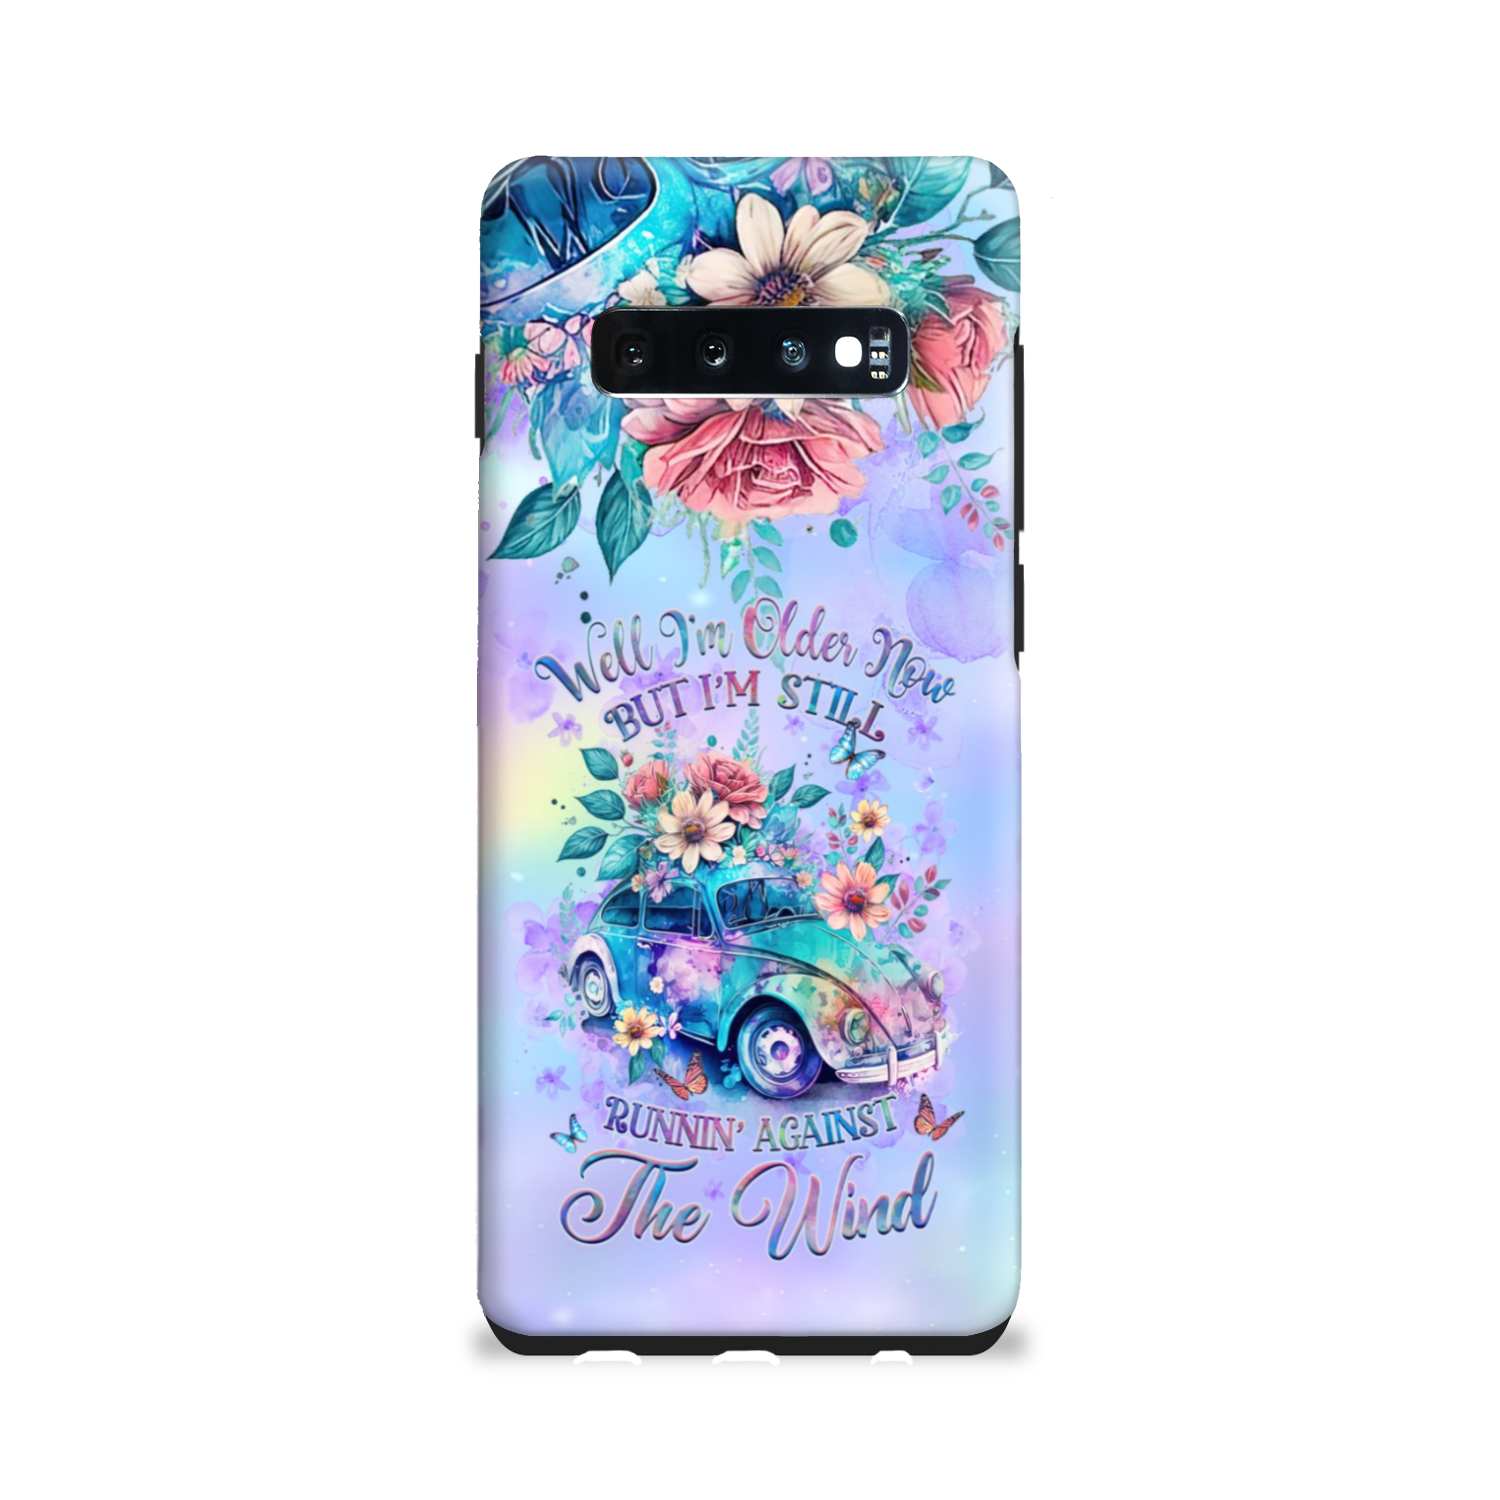 RUNNING AGAINST THE WIND PHONE CASE - YHHG0410232